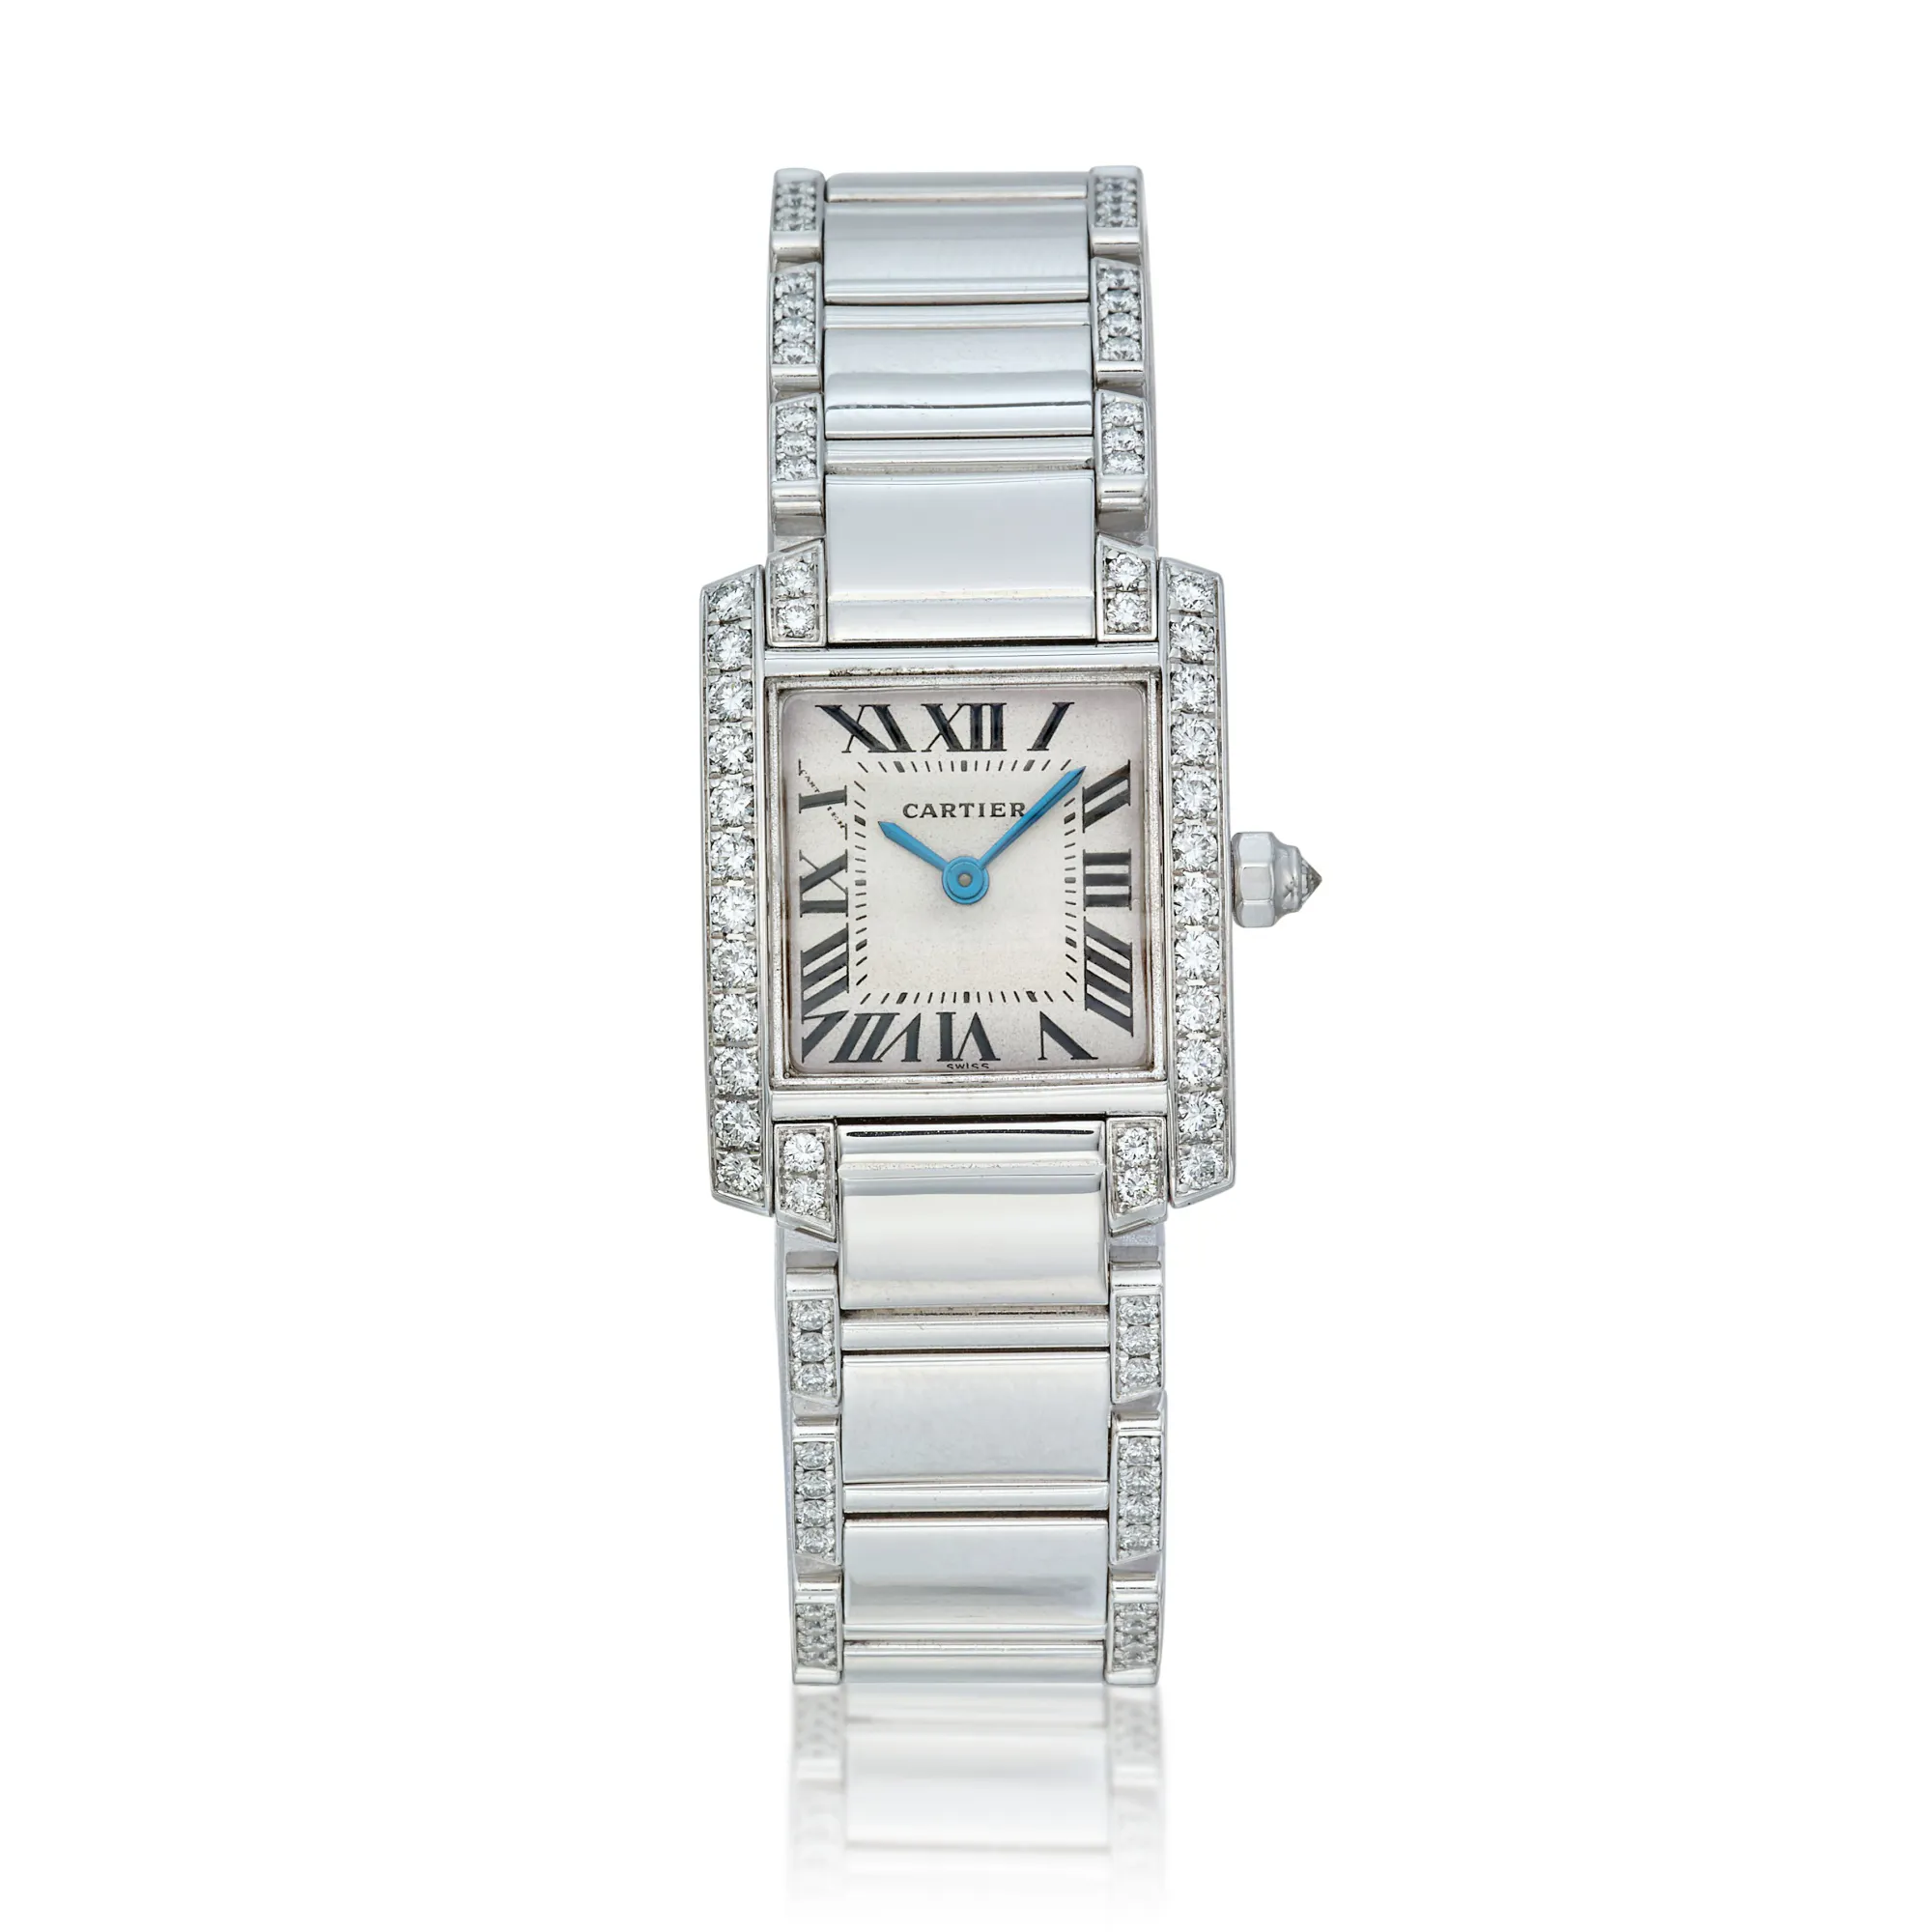 Cartier Tank Française 2403 nullmm White gold and diamond-set Silver